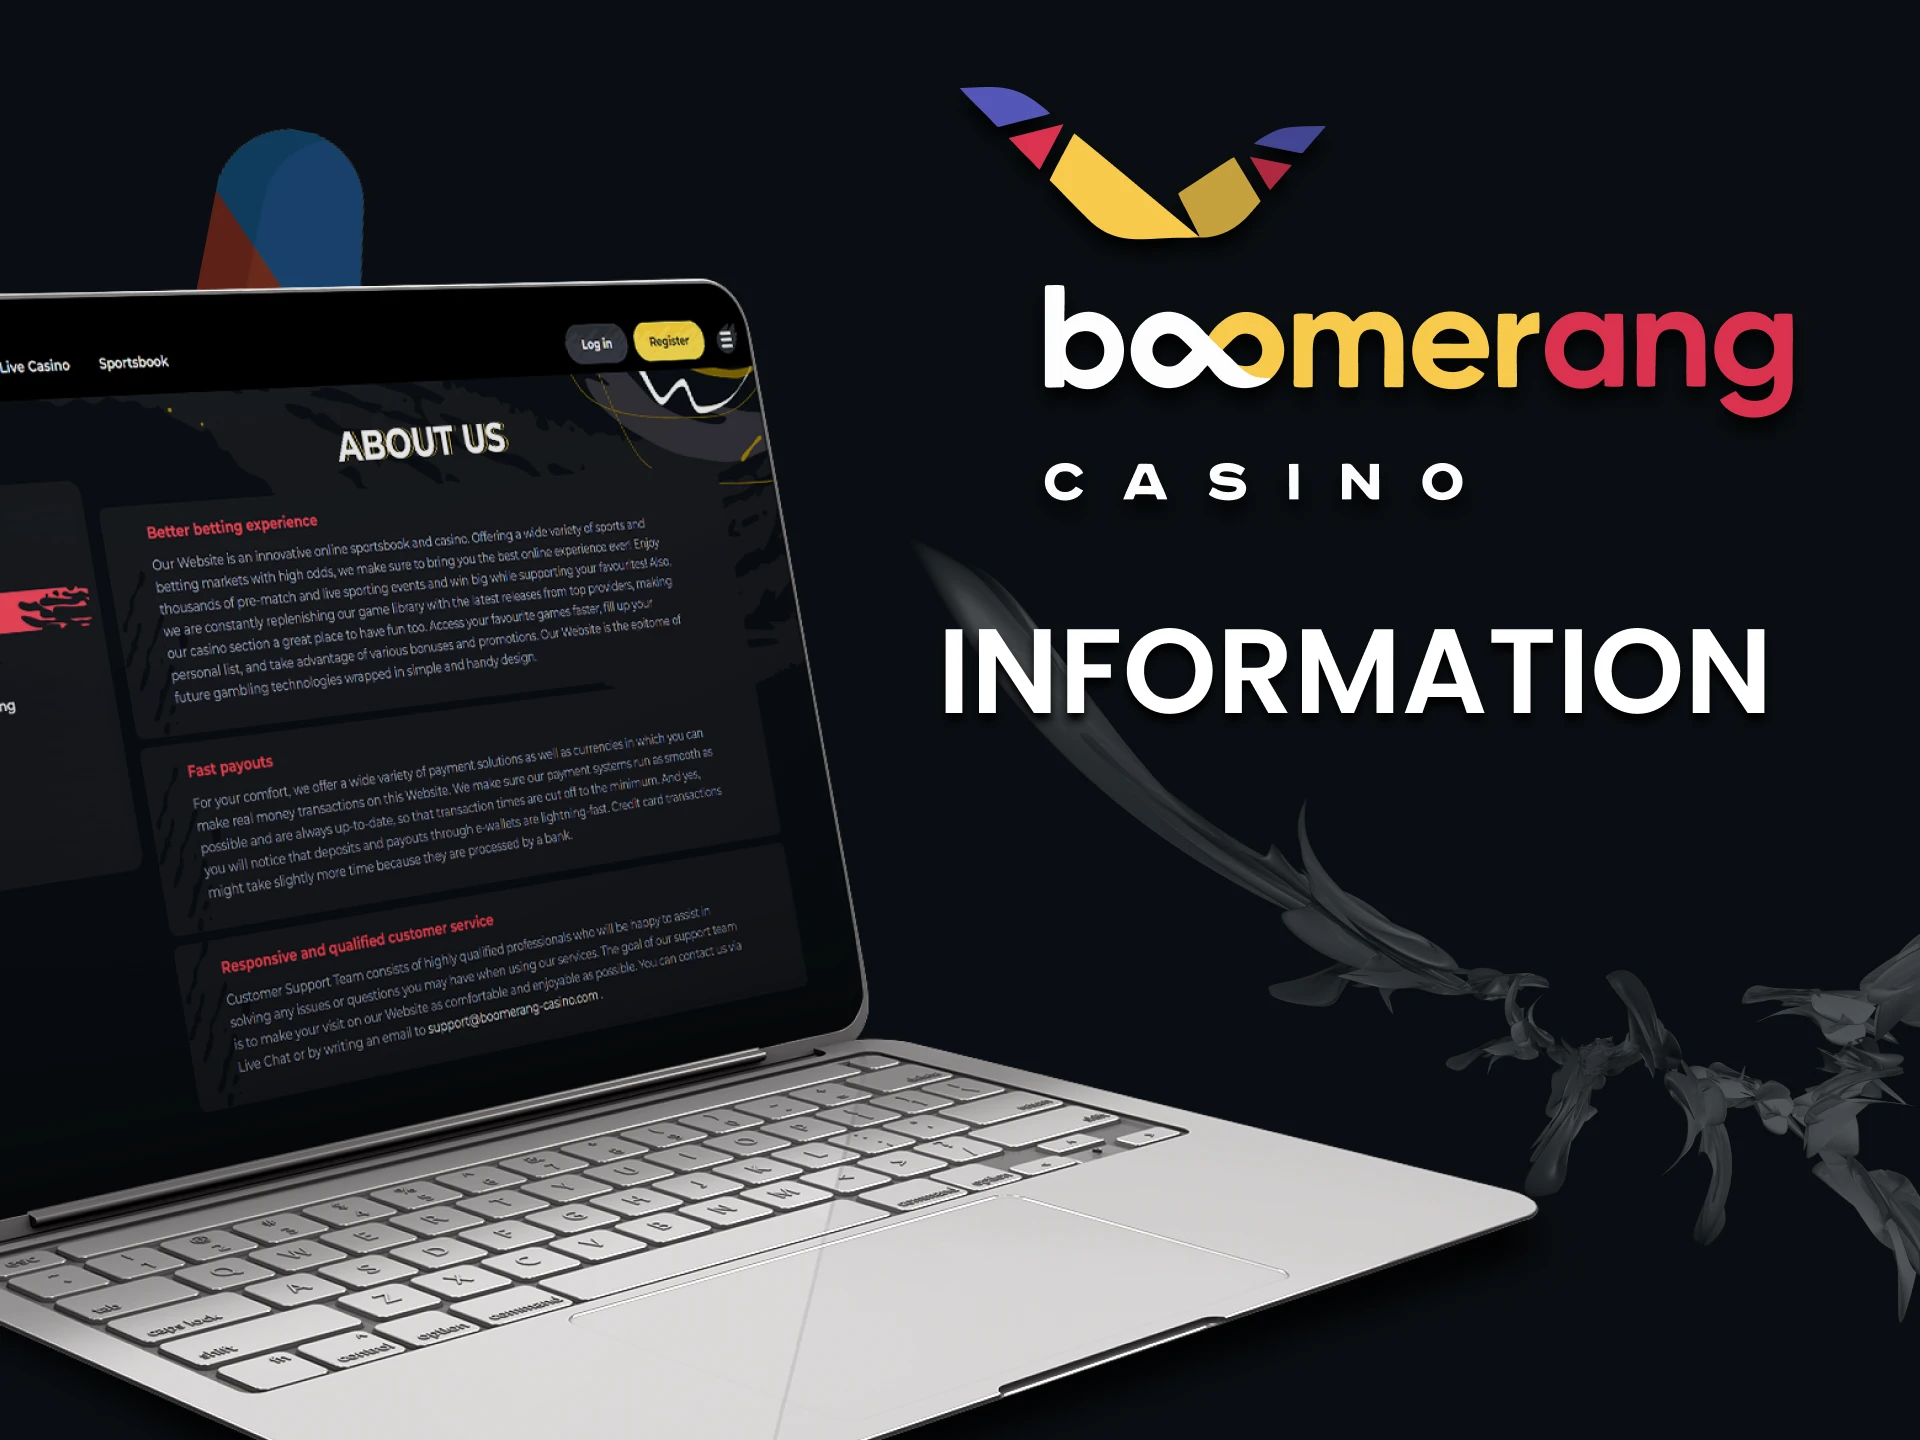 Find out everything about the Bommerang Casino website.